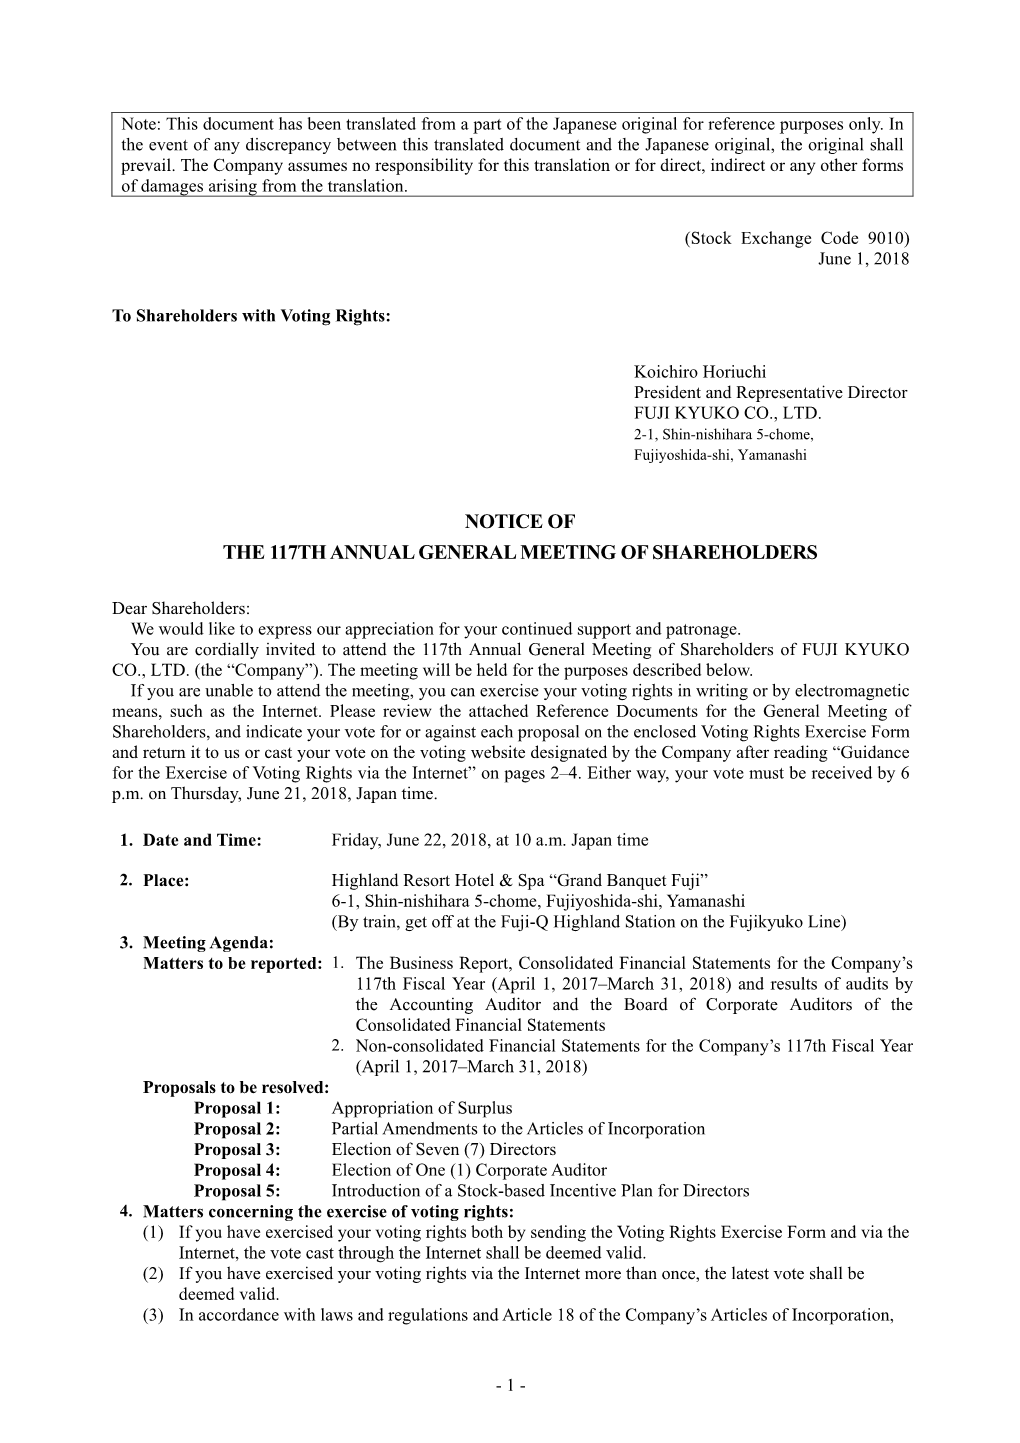 Notice of the 117Th Annual General Meeting of Shareholders